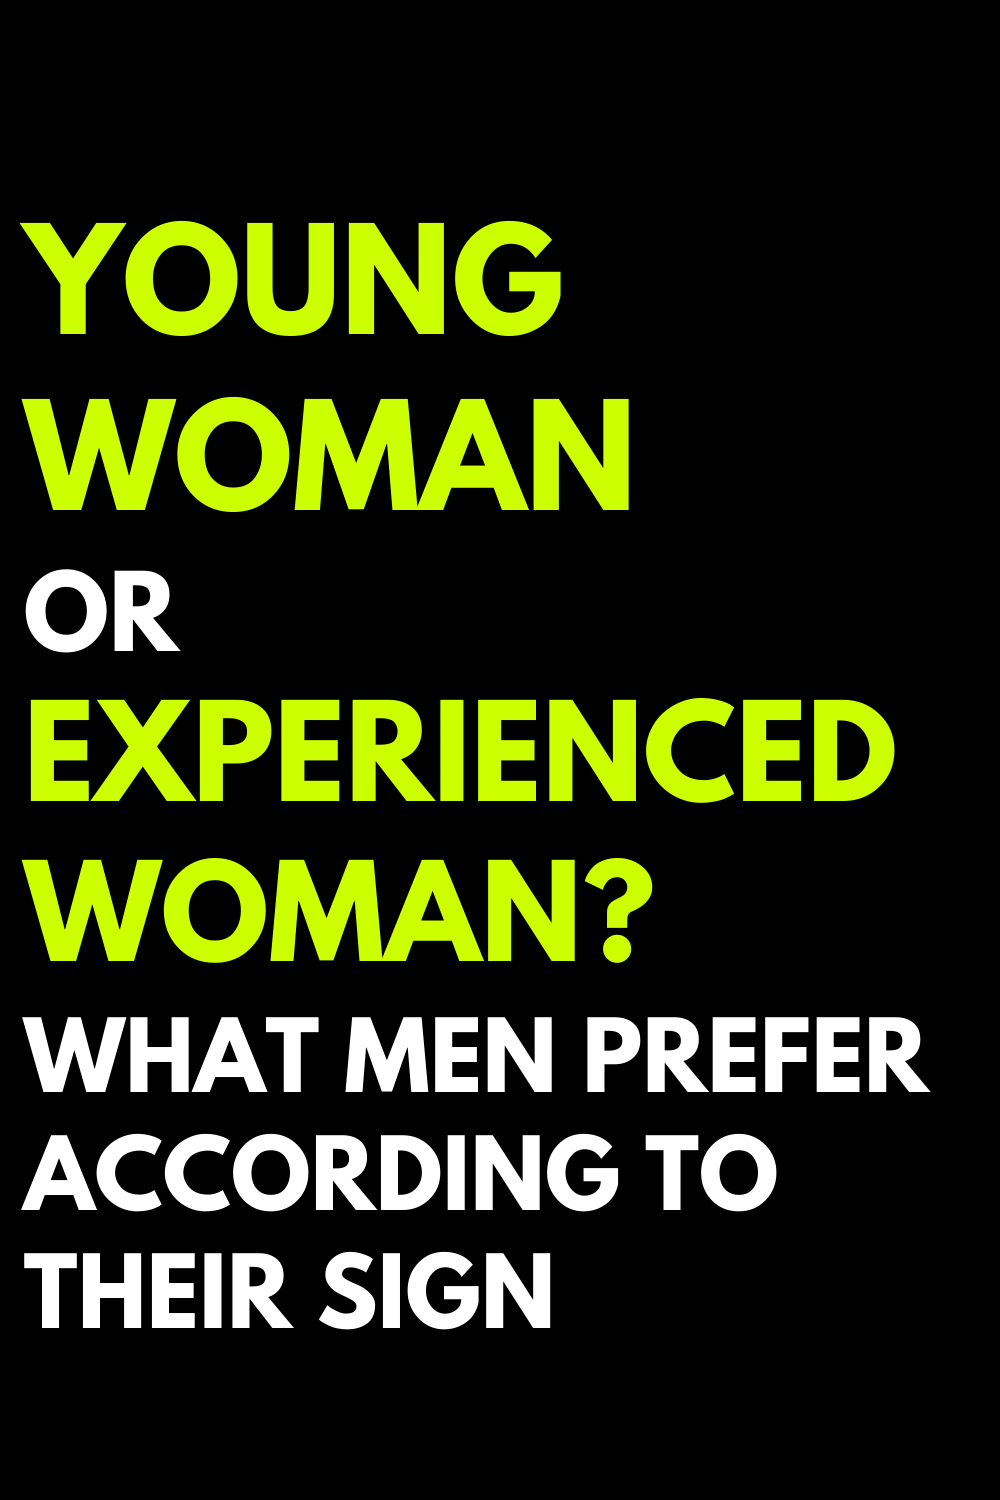 Young woman or experienced woman? What men prefer according to their sign